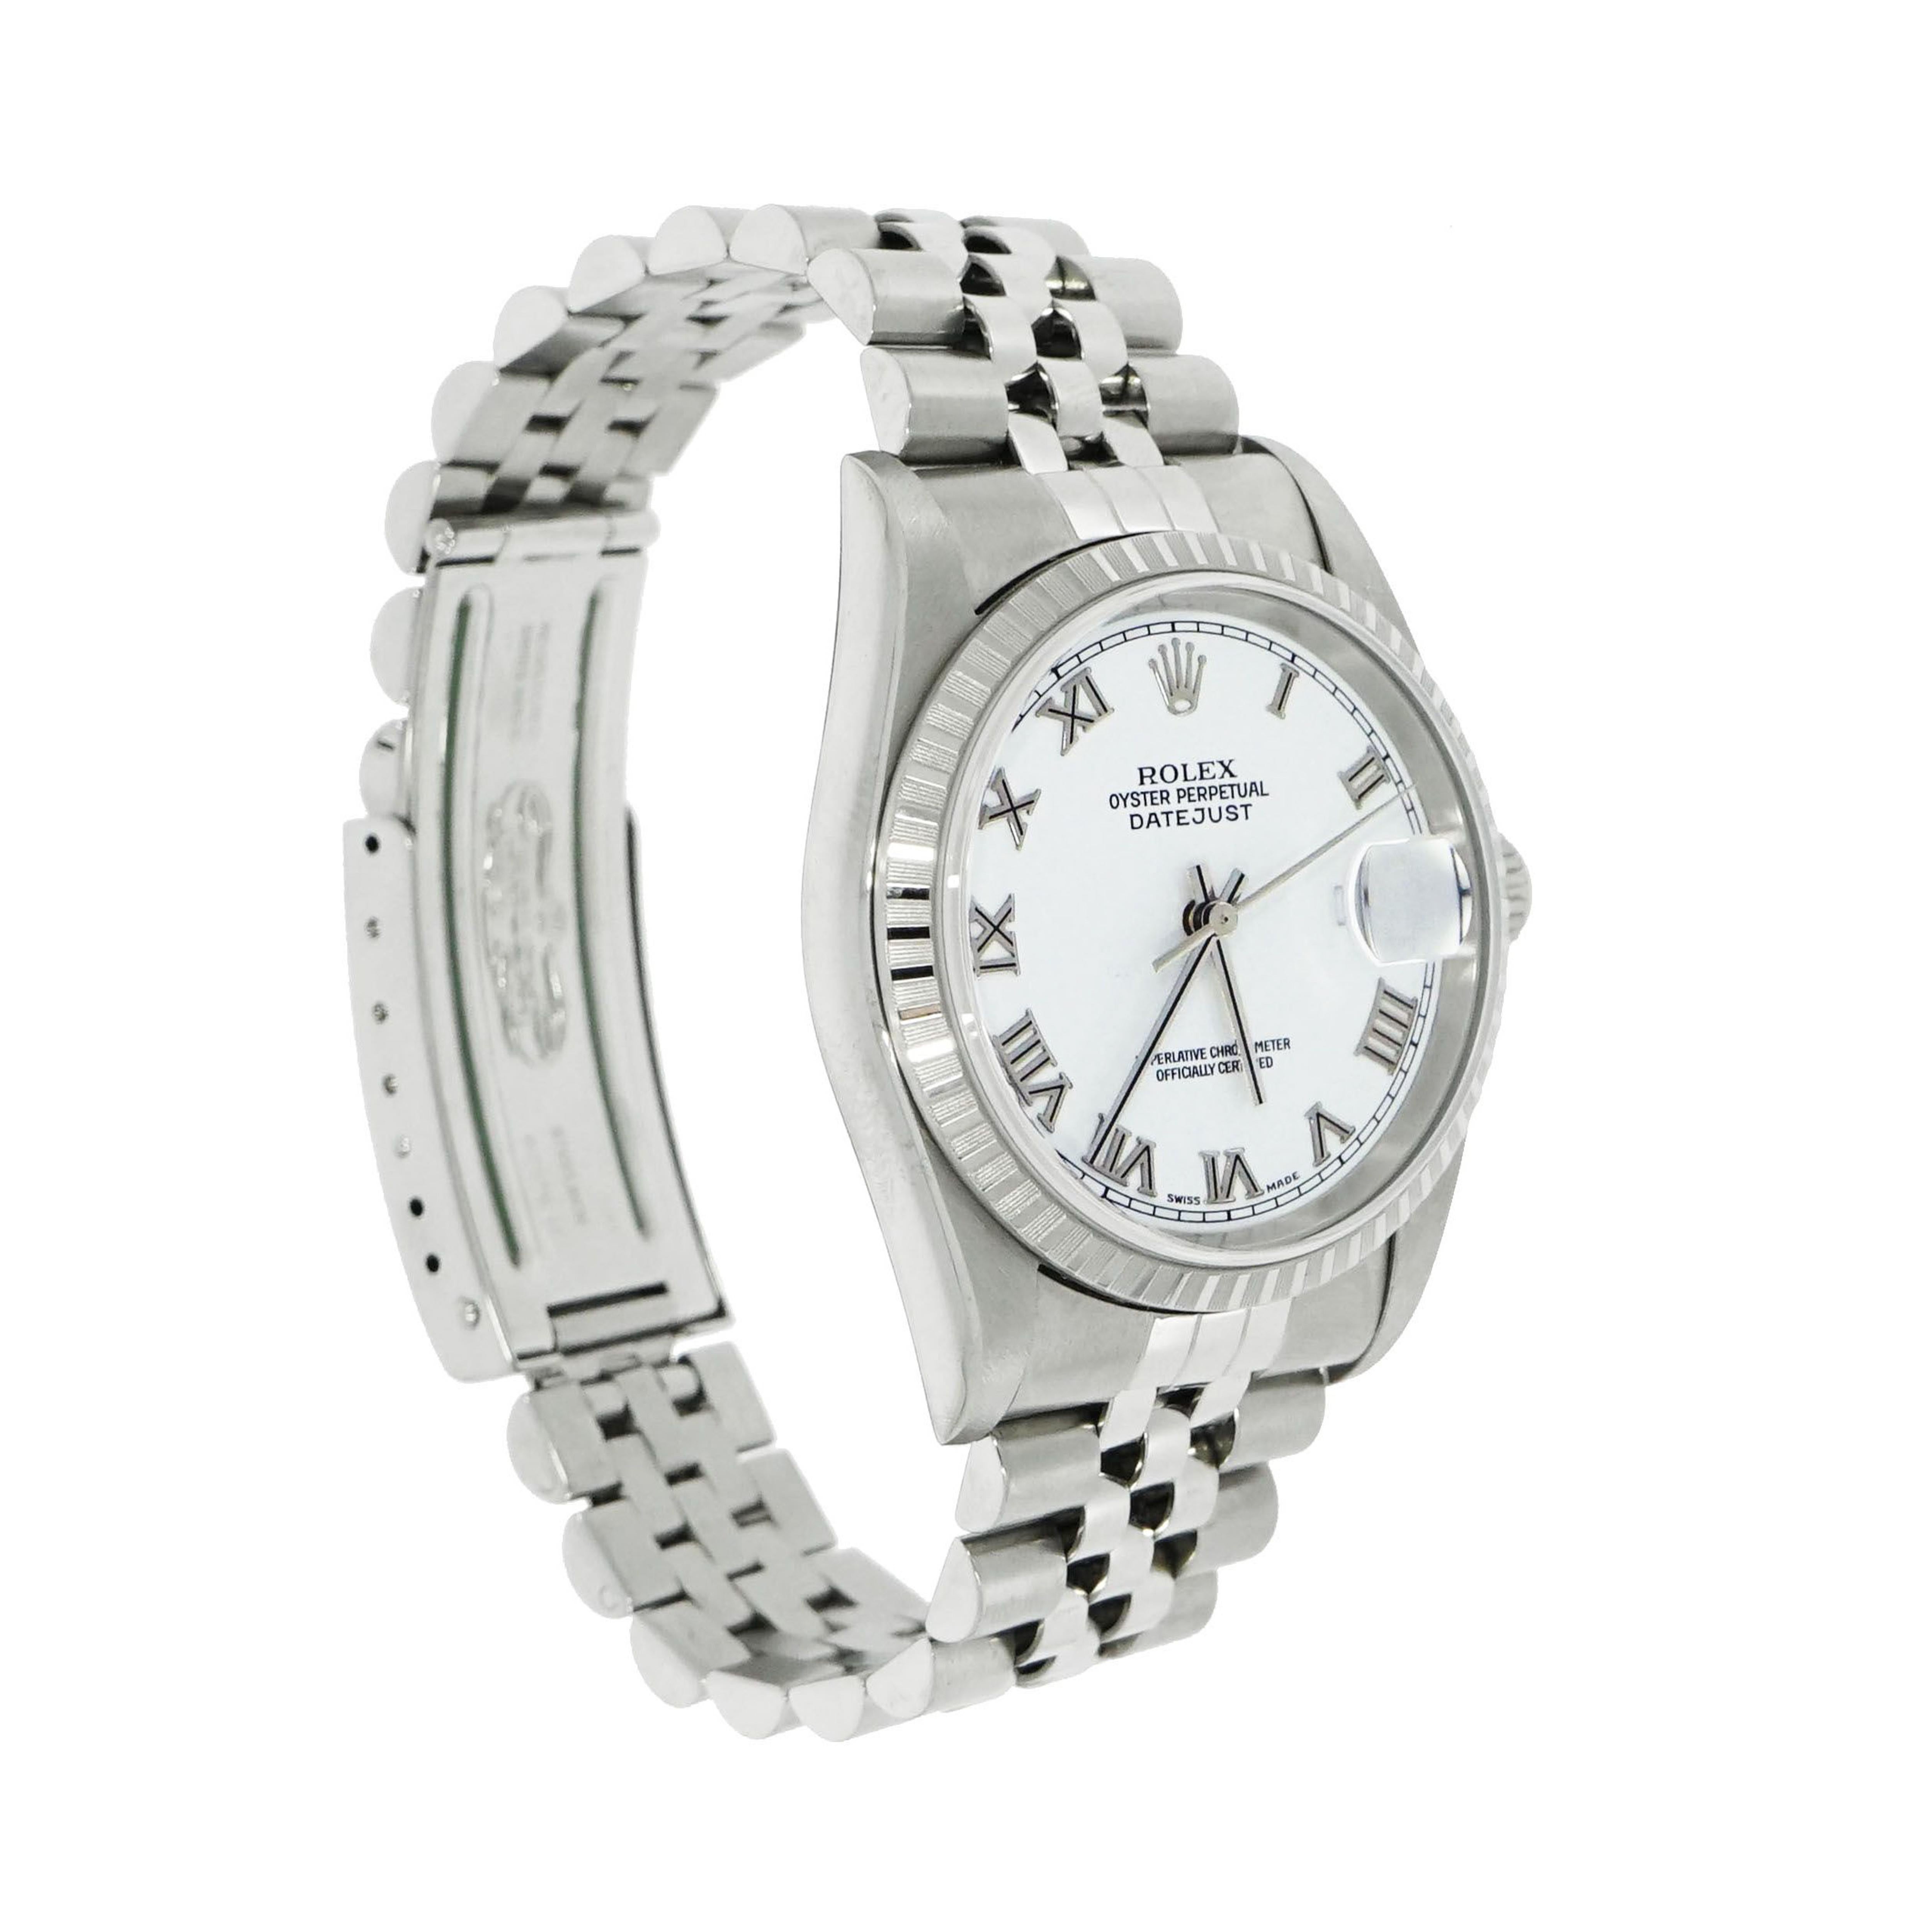 Rolex Datejust, 36mm stainless steel case, fluted bezel, white dial with Roman numerals hour markers, date with magnification cyclops at 3 o’clock, self- winding automatic movement, quick set date function, sapphire crystal, on a jubilee bracelet